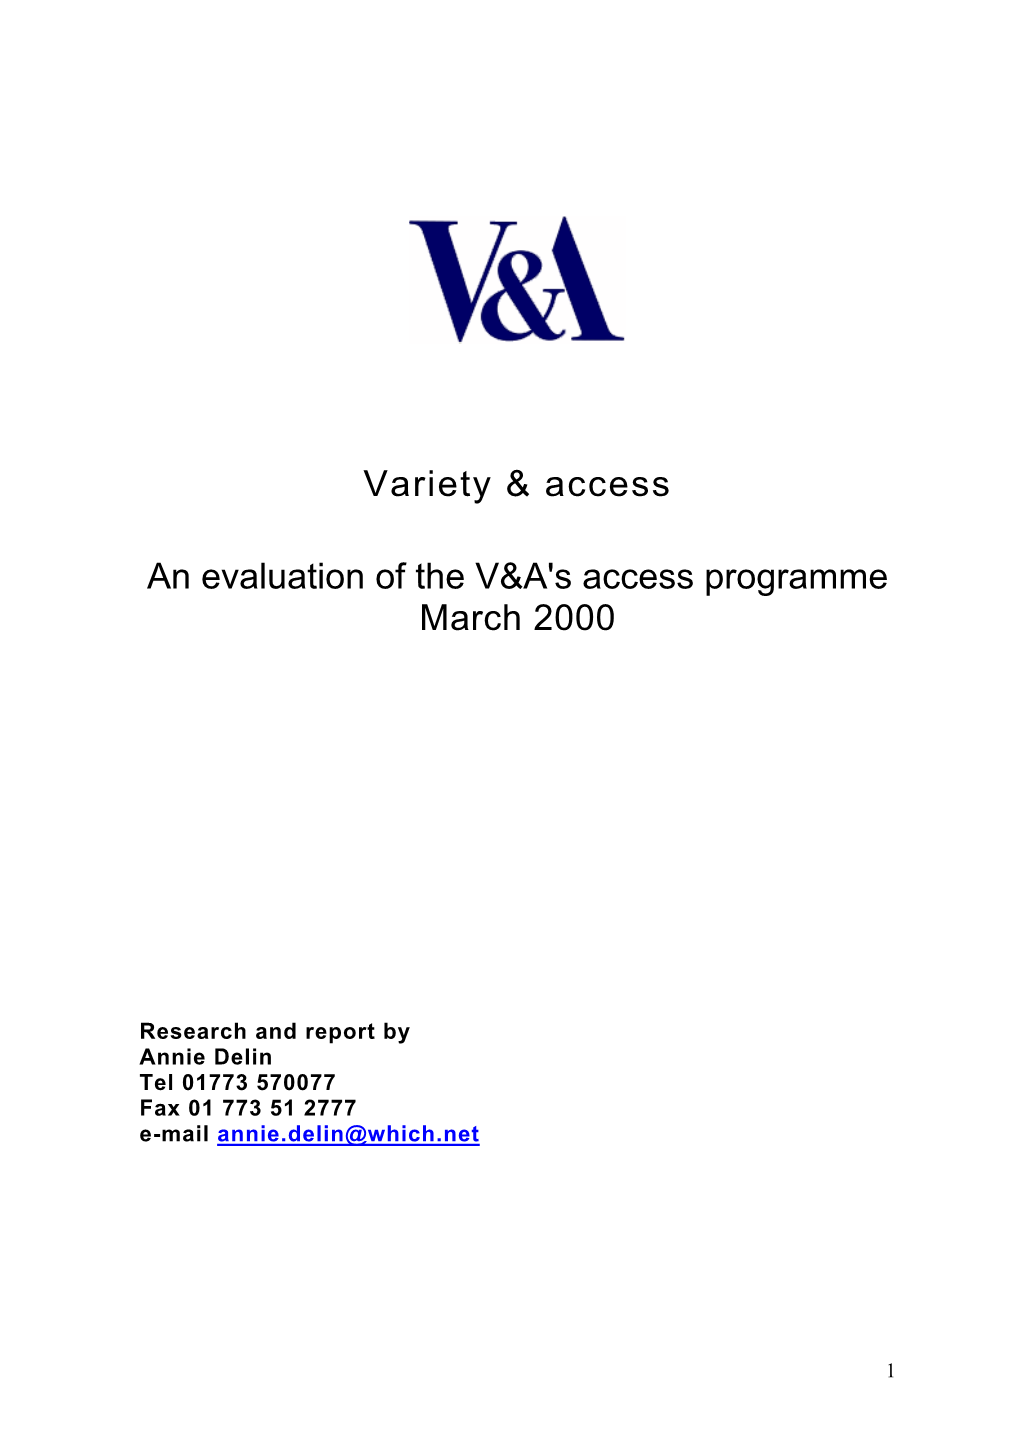 Variety & Access an Evaluation of the V&A's Access Programme March 2000